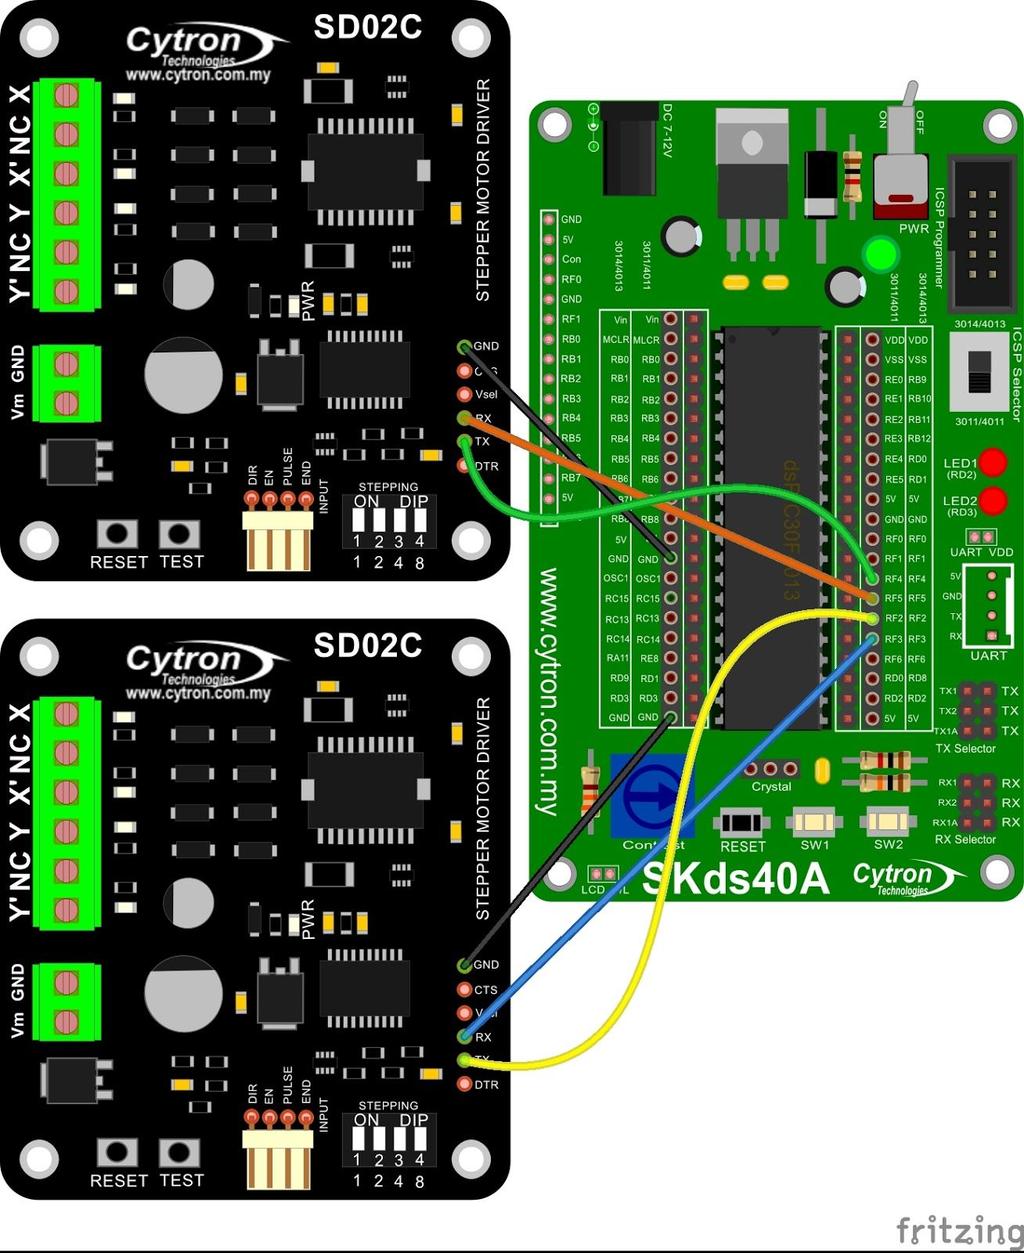 Sample connection to control 2 SD02C using software and hardware UART e. To supply power to SD02C, user has to connect SD02C VM to SKds40A Vin pin and GND to SKds40A GND pin.